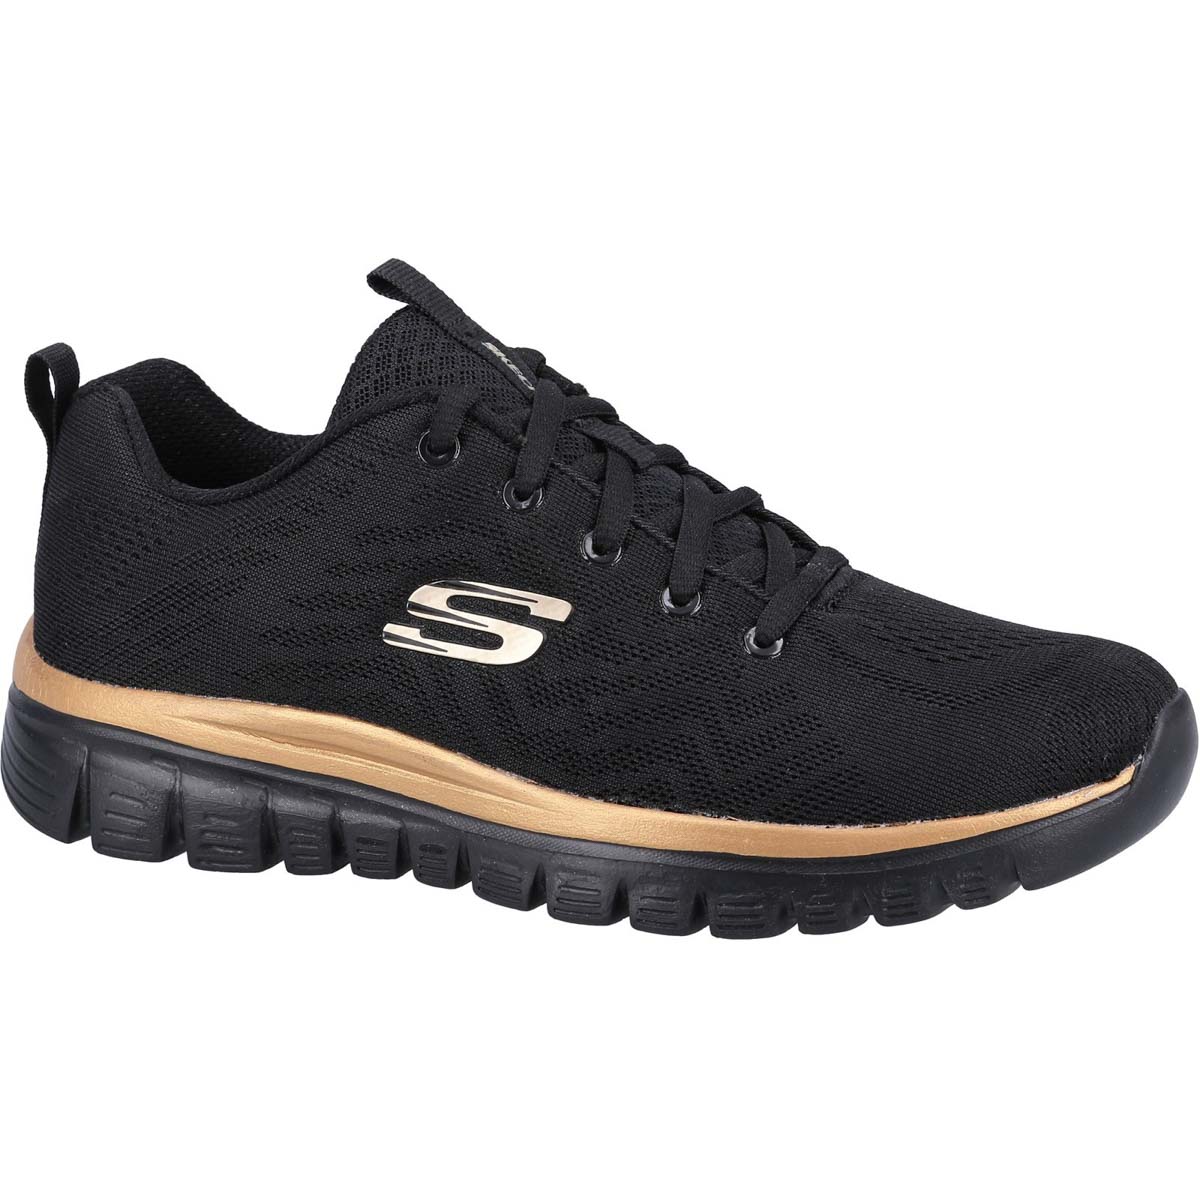 Skechers Graceful Get Connected Black Rose Gold Womens Trainers 12615 In Size 6 In Plain Black Rose Gold